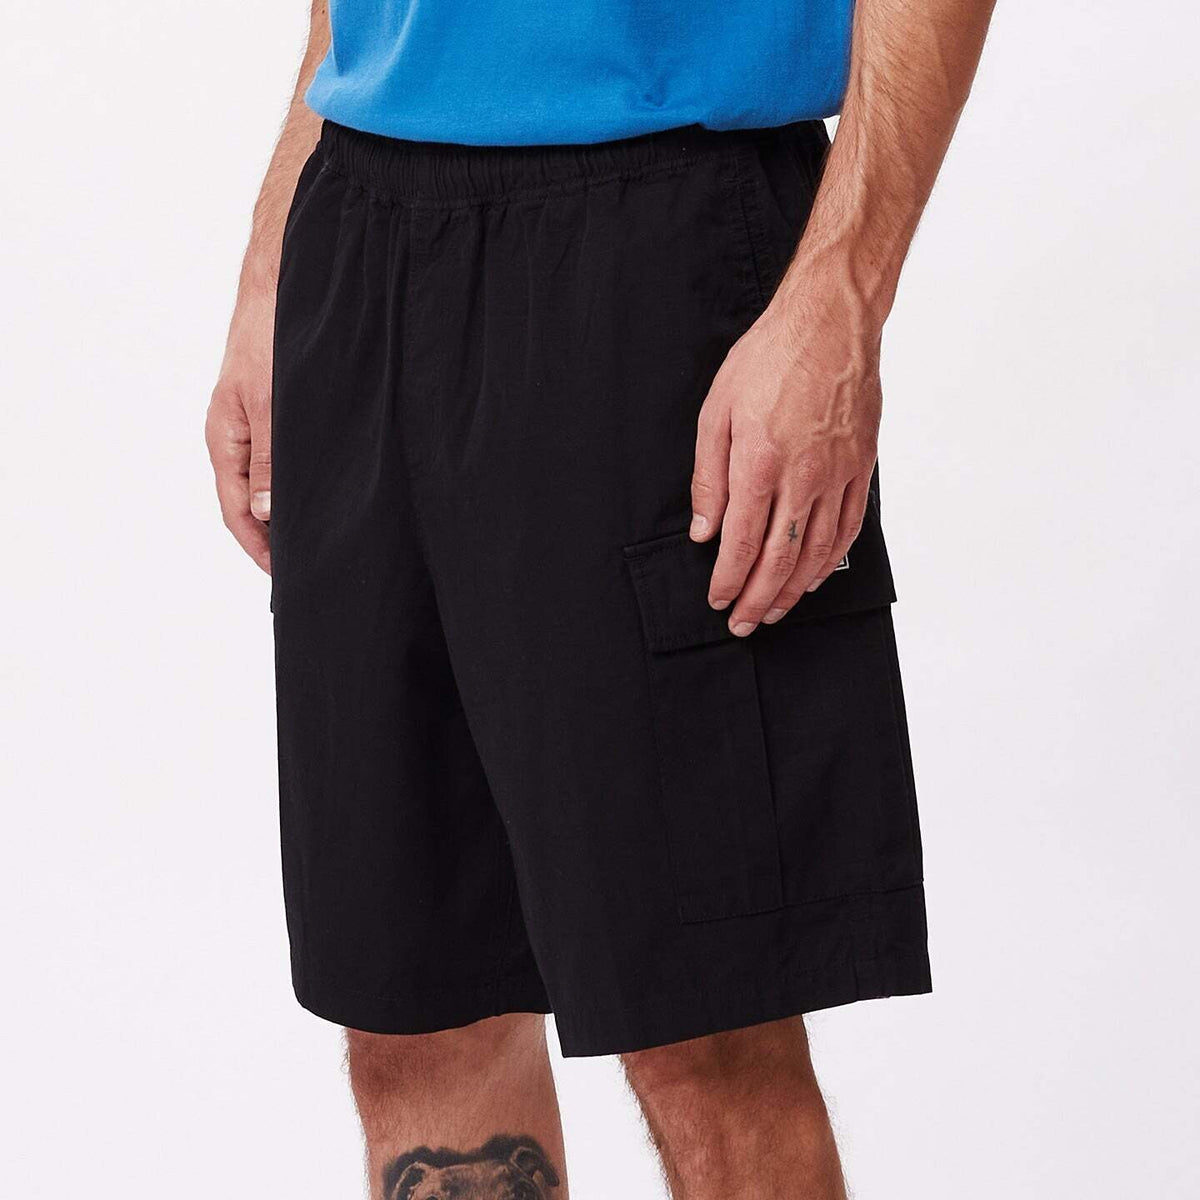 Obey ripstop cargo short